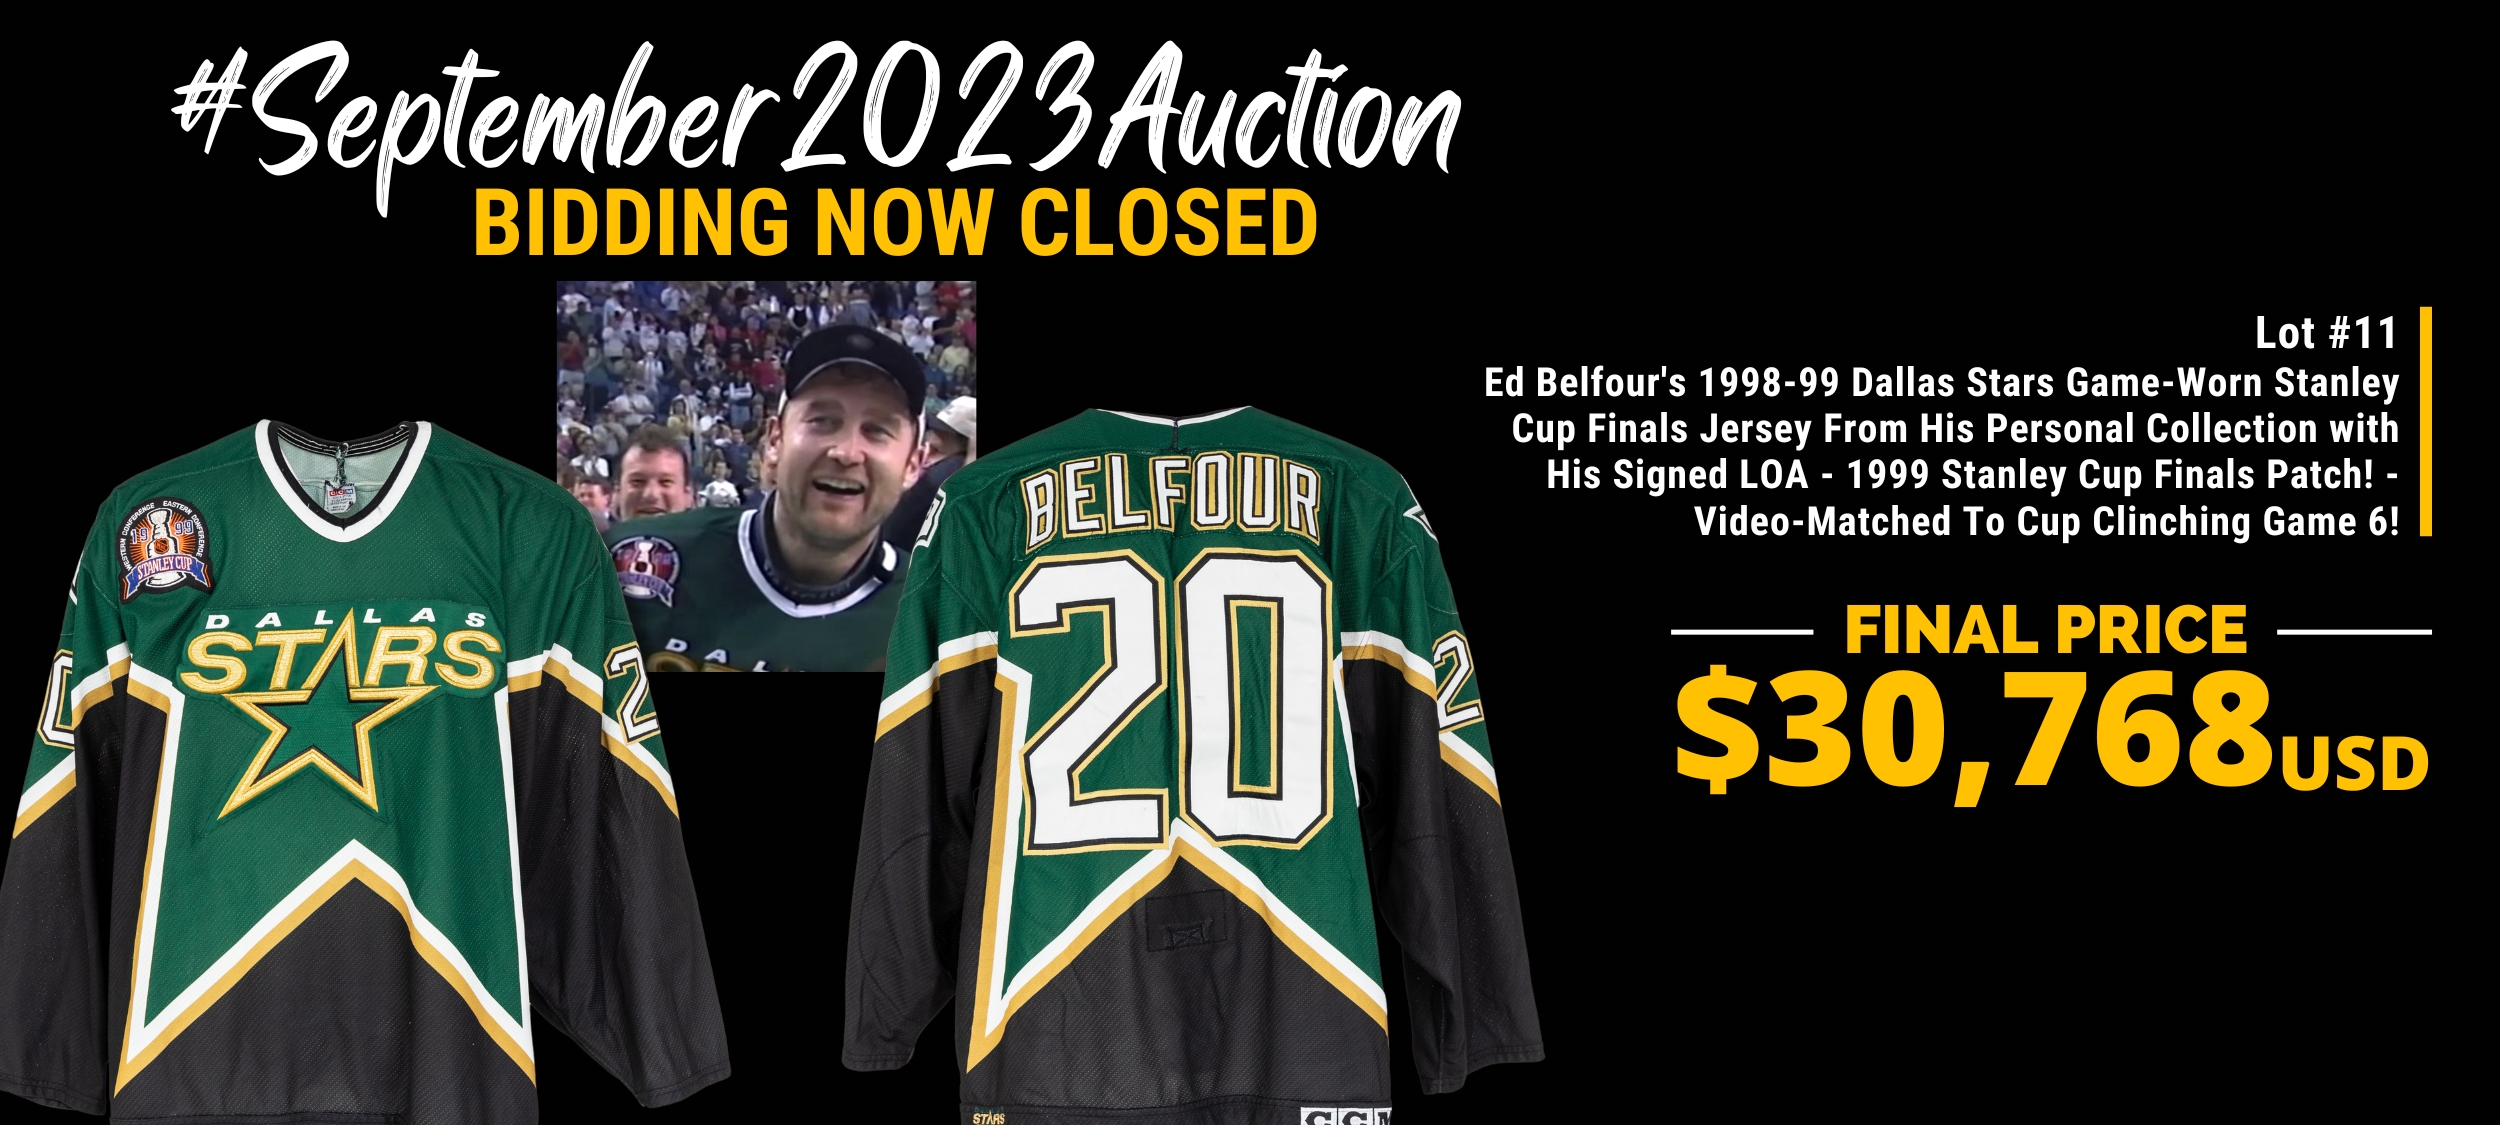 NHL Auctions - Signed Hockey Memorabilia, Autographed Jerseys, Collectables